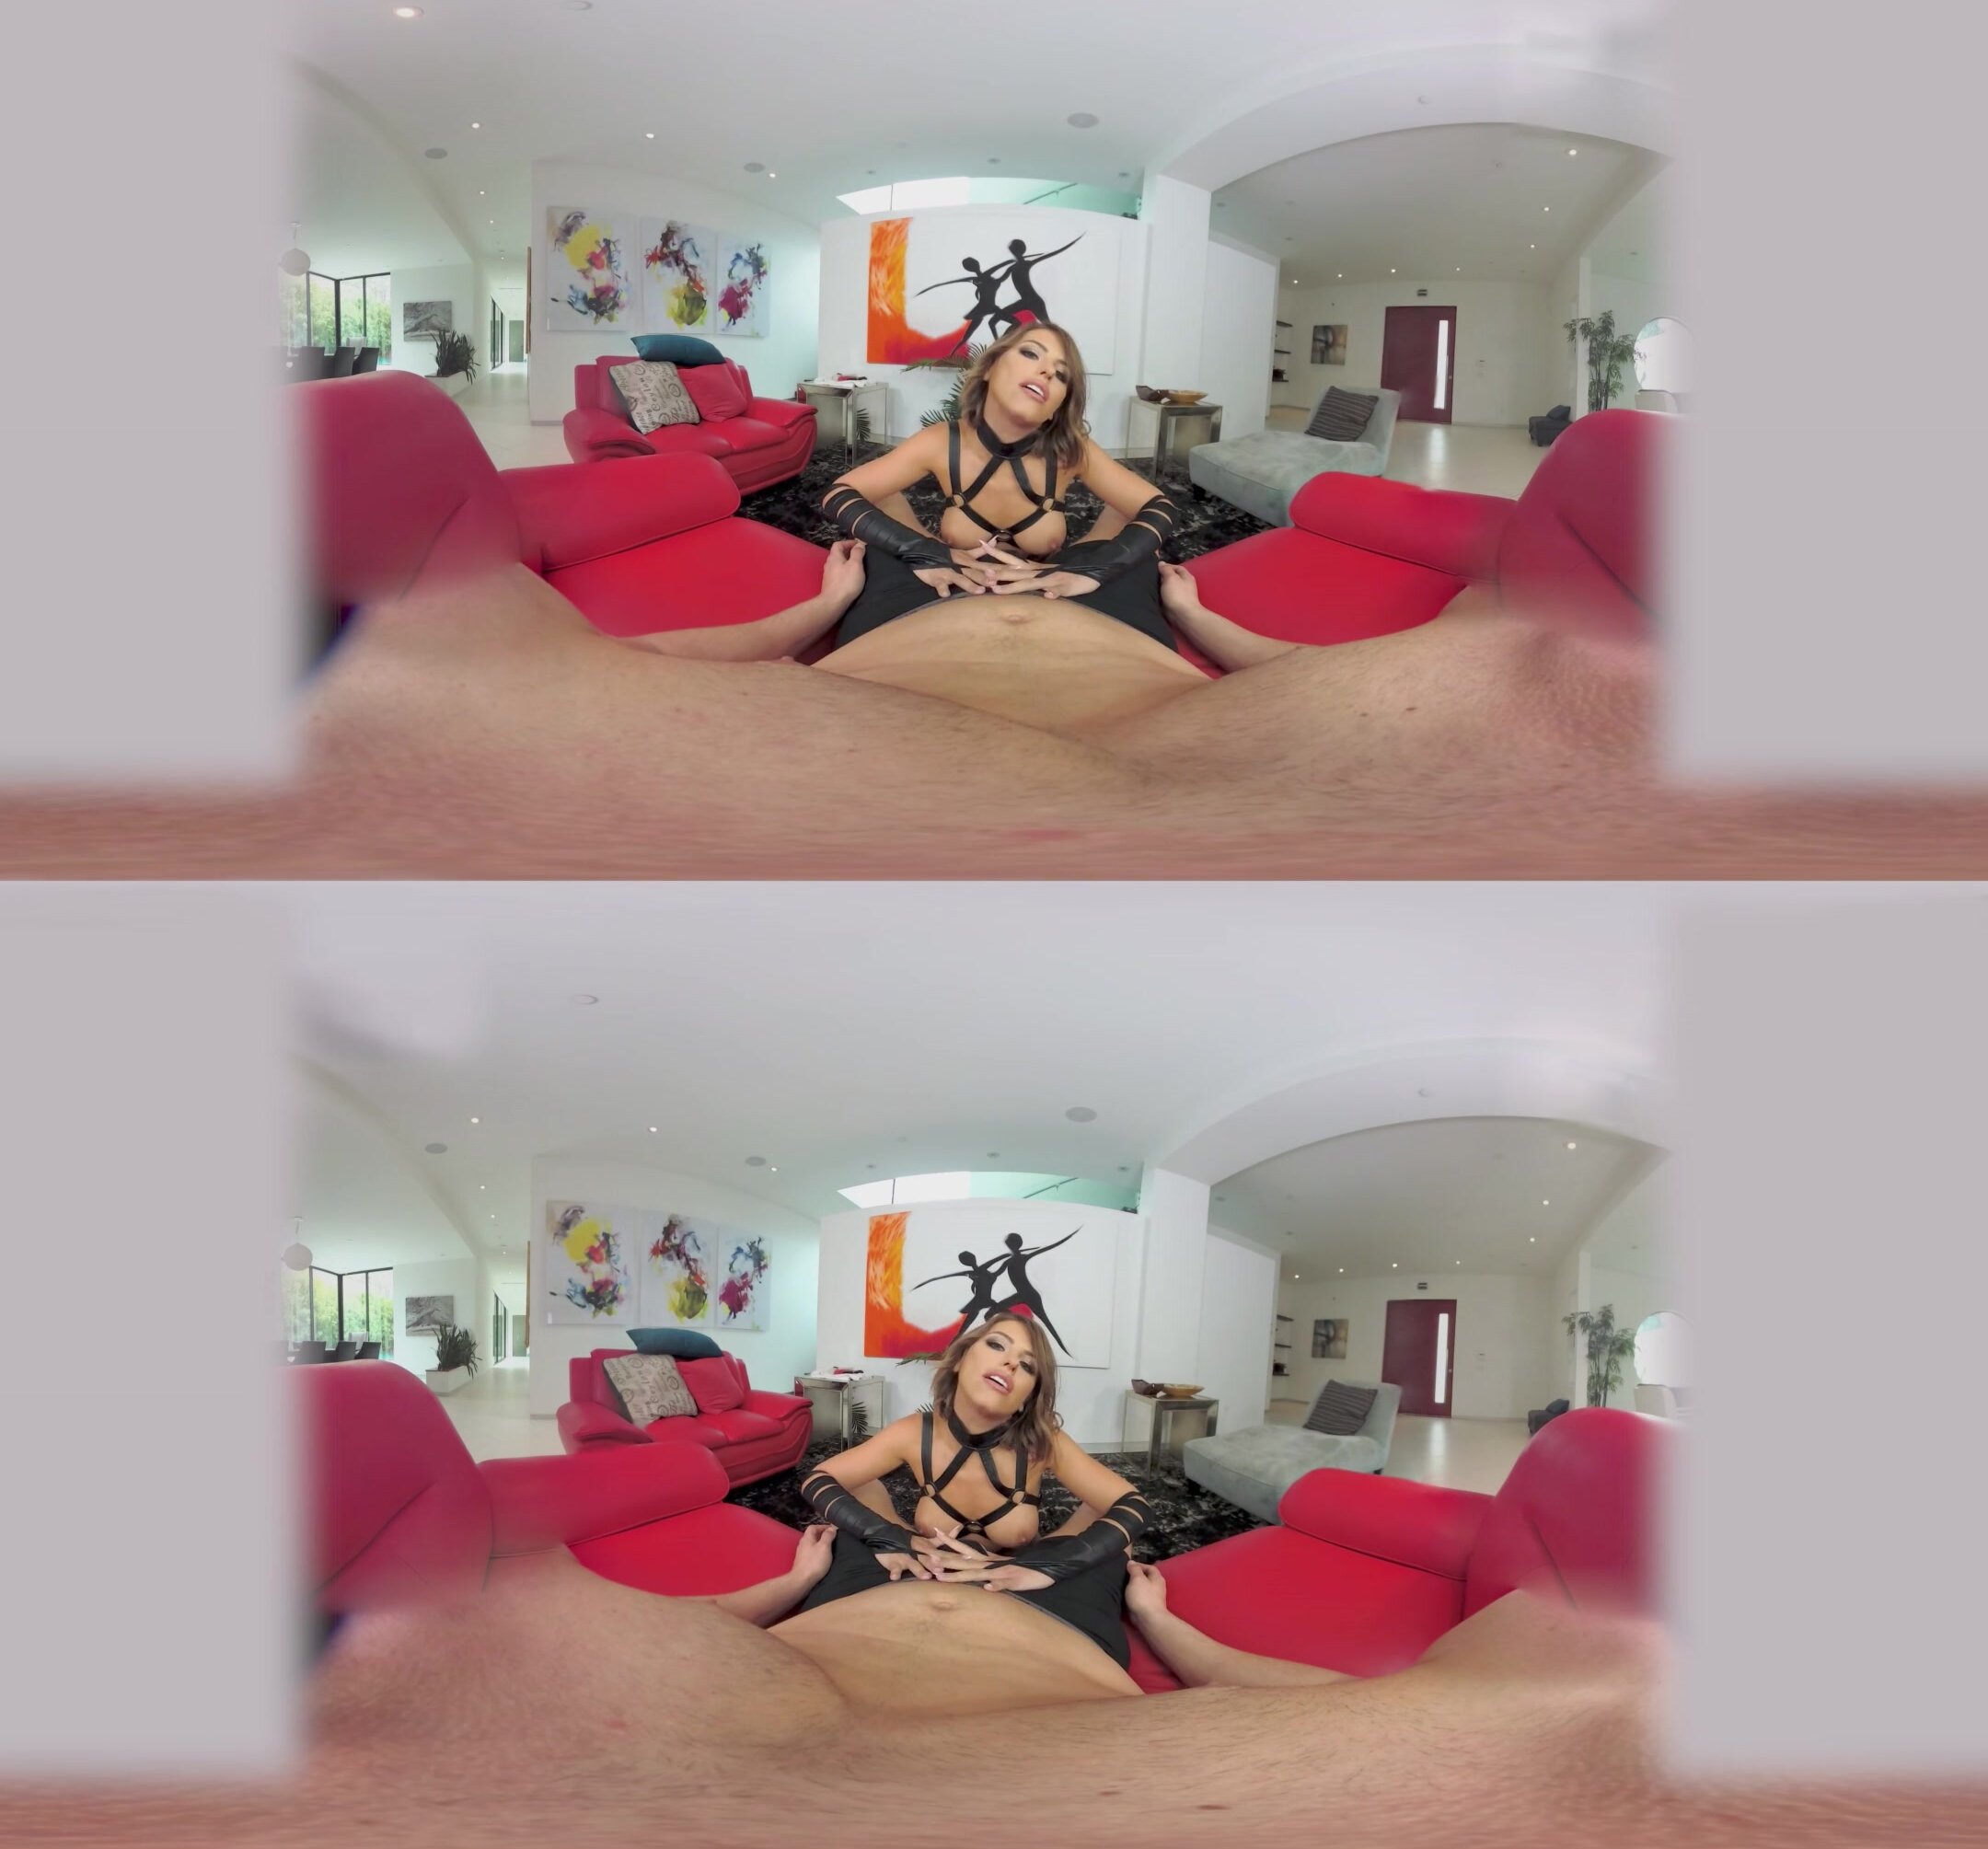 Vr 360 - Adriana Chechik Gets Fucked In The Ass And Squ